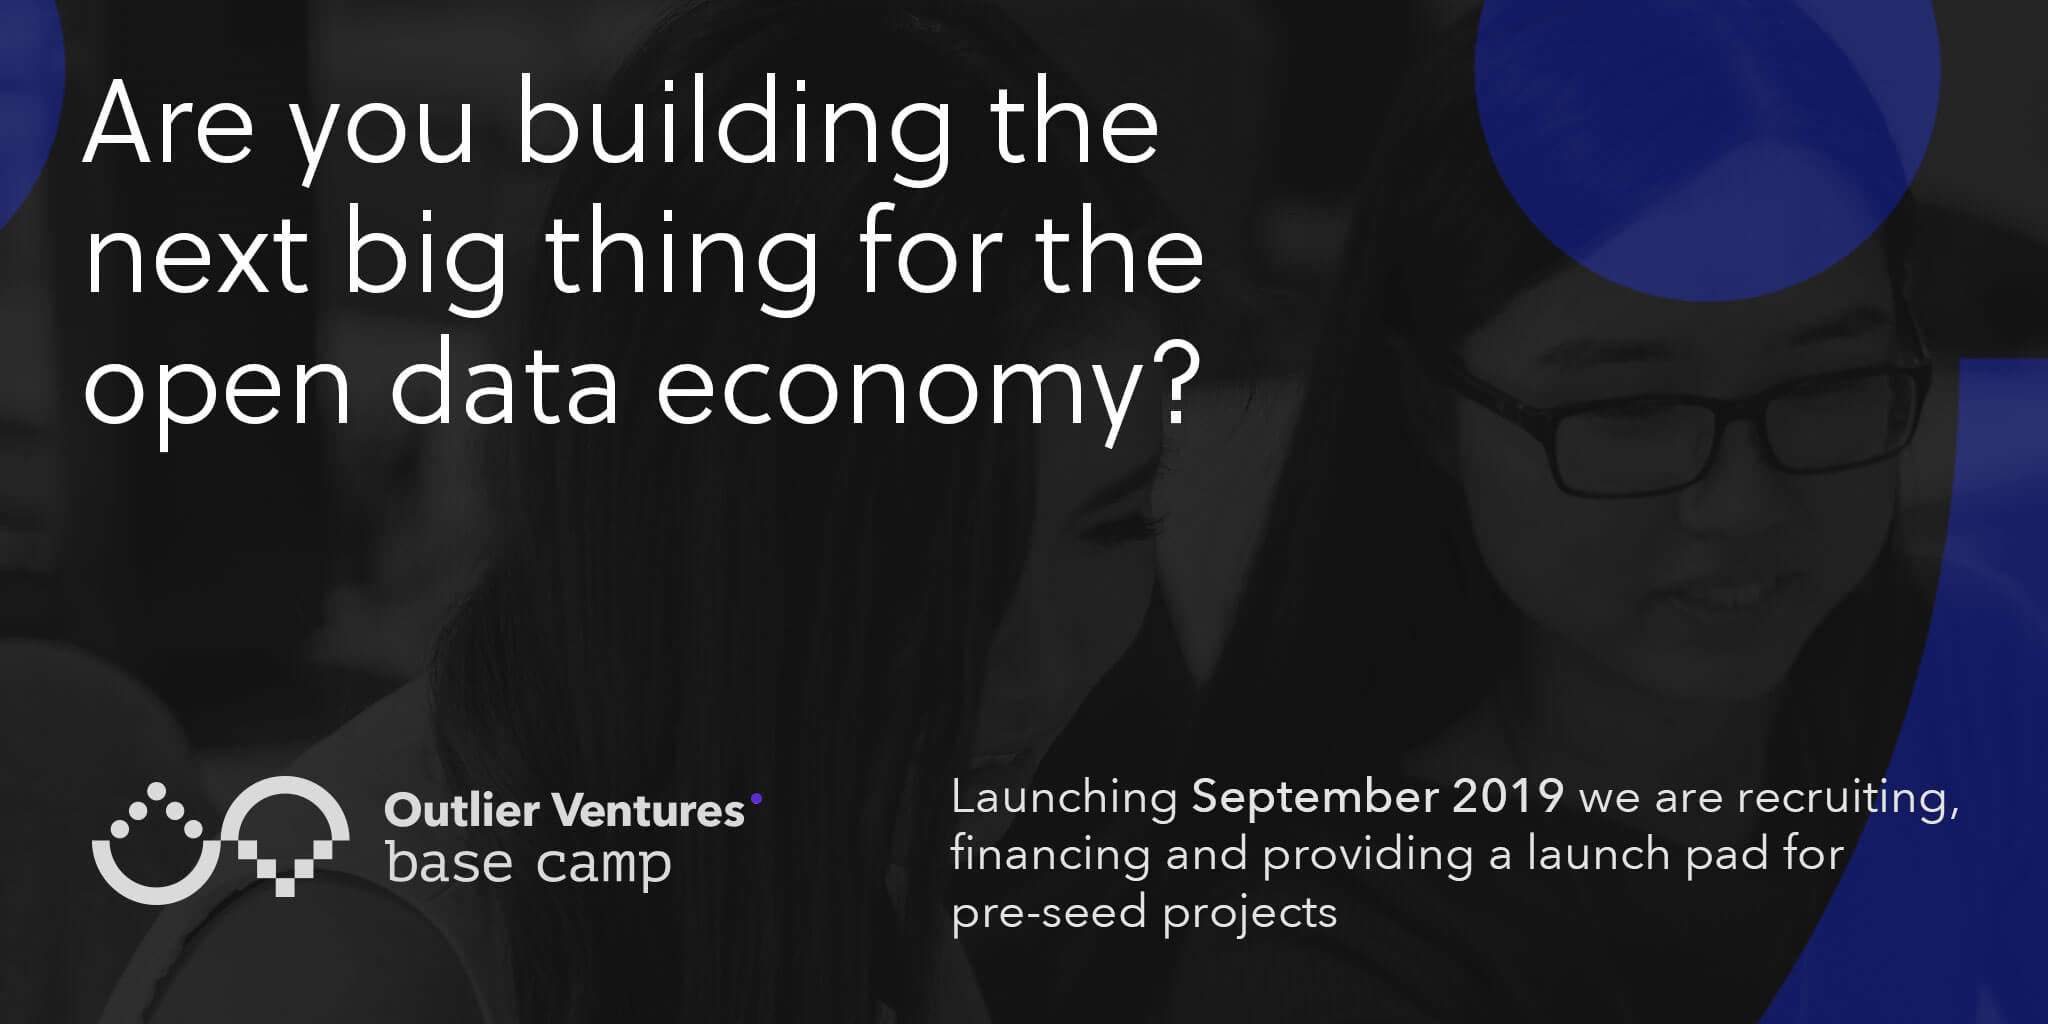 Let Us Face The Future Together: Help Us Build an Open Data Economy Outlier Ventures